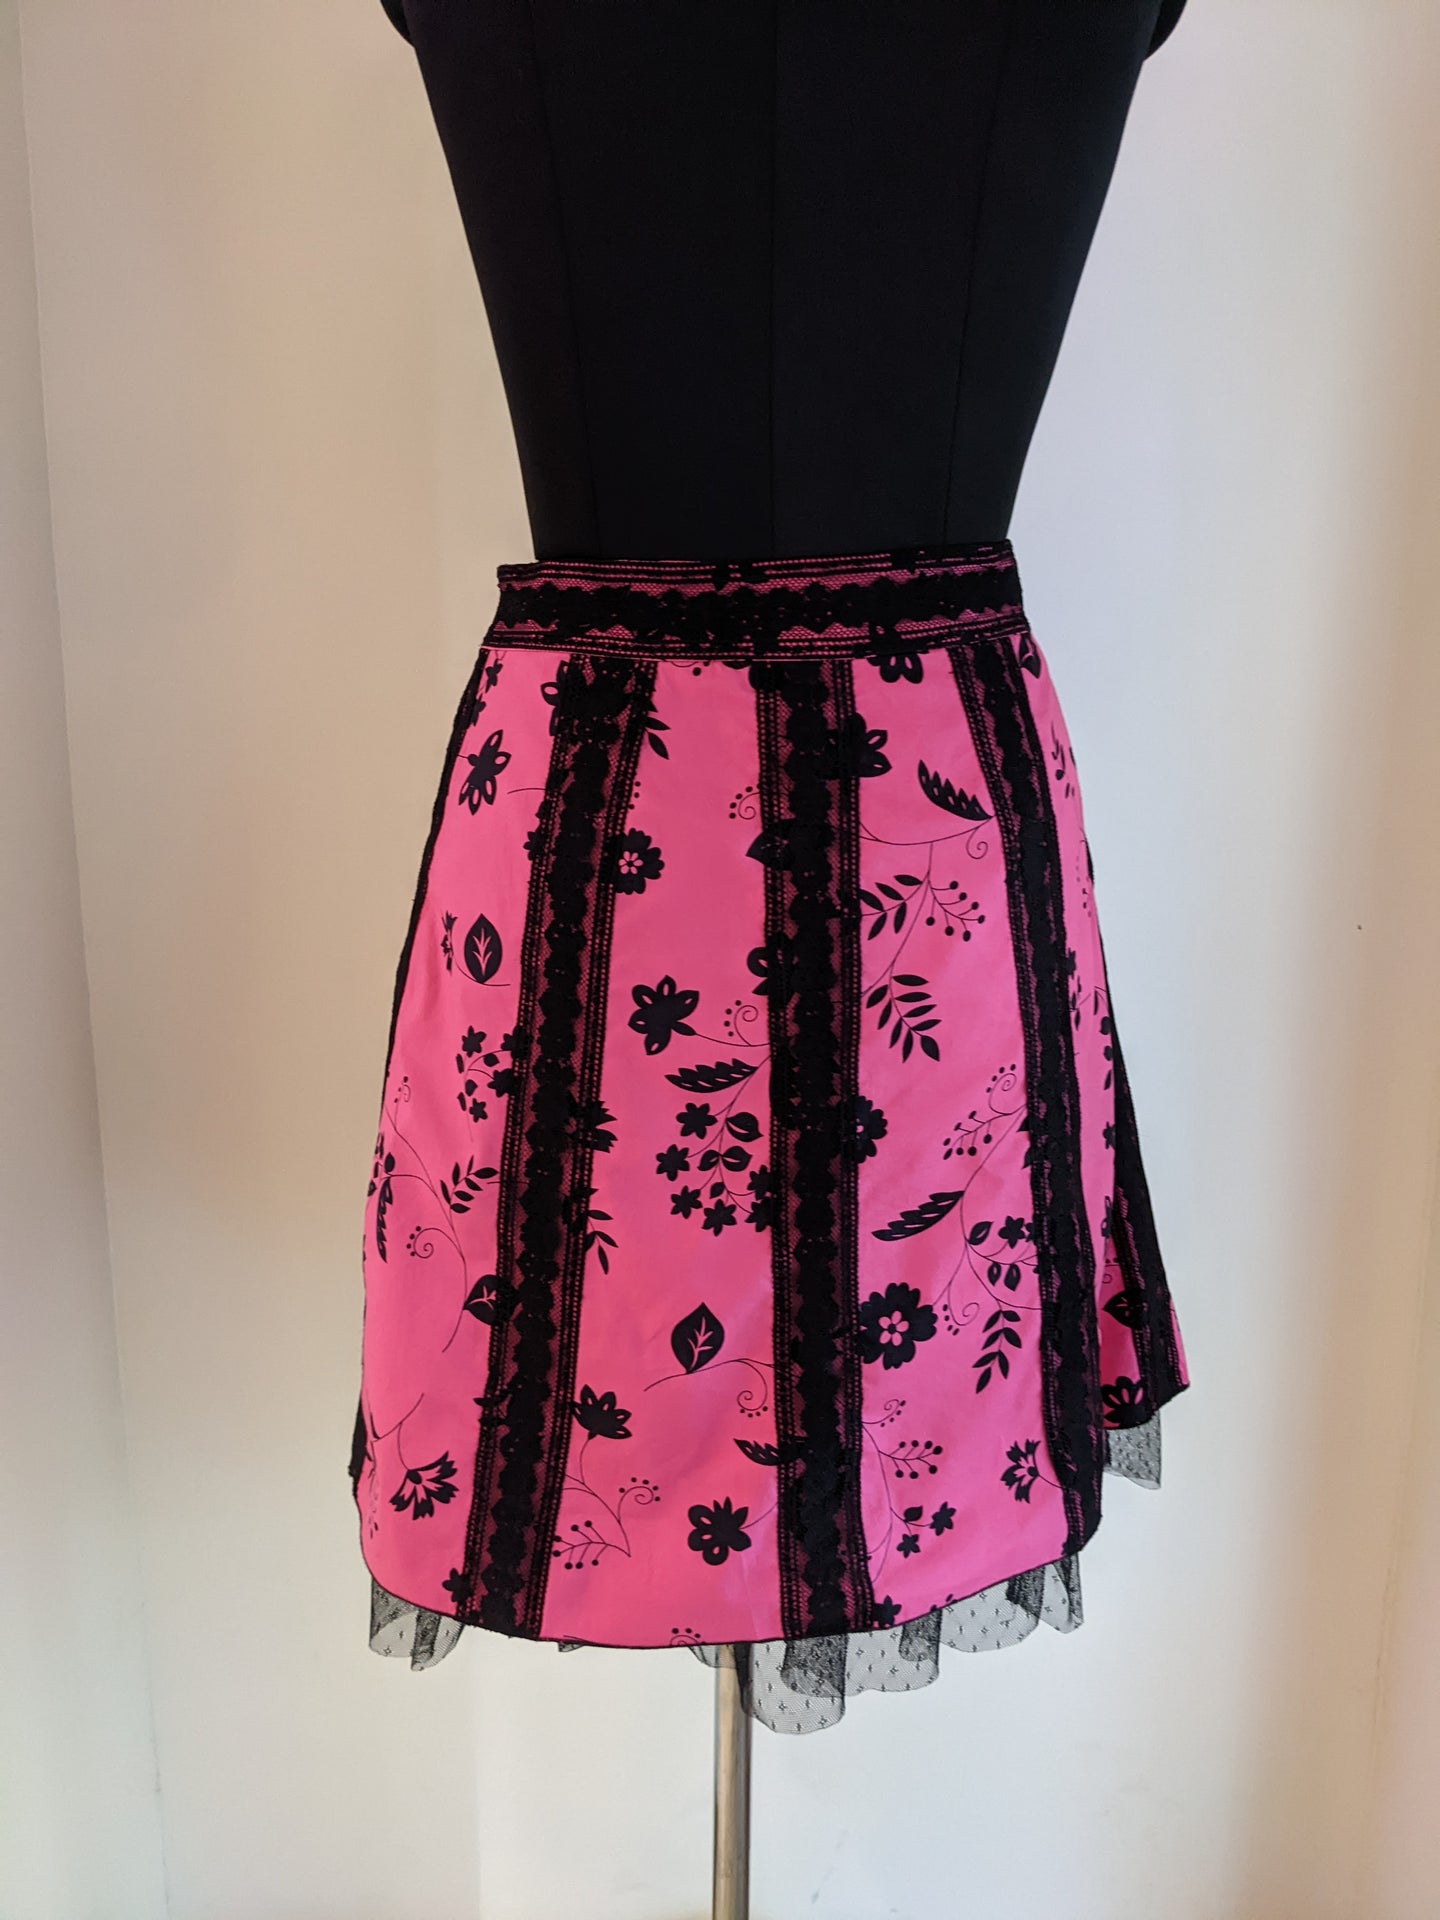 New York City Design Co.Floral Lace Skirt